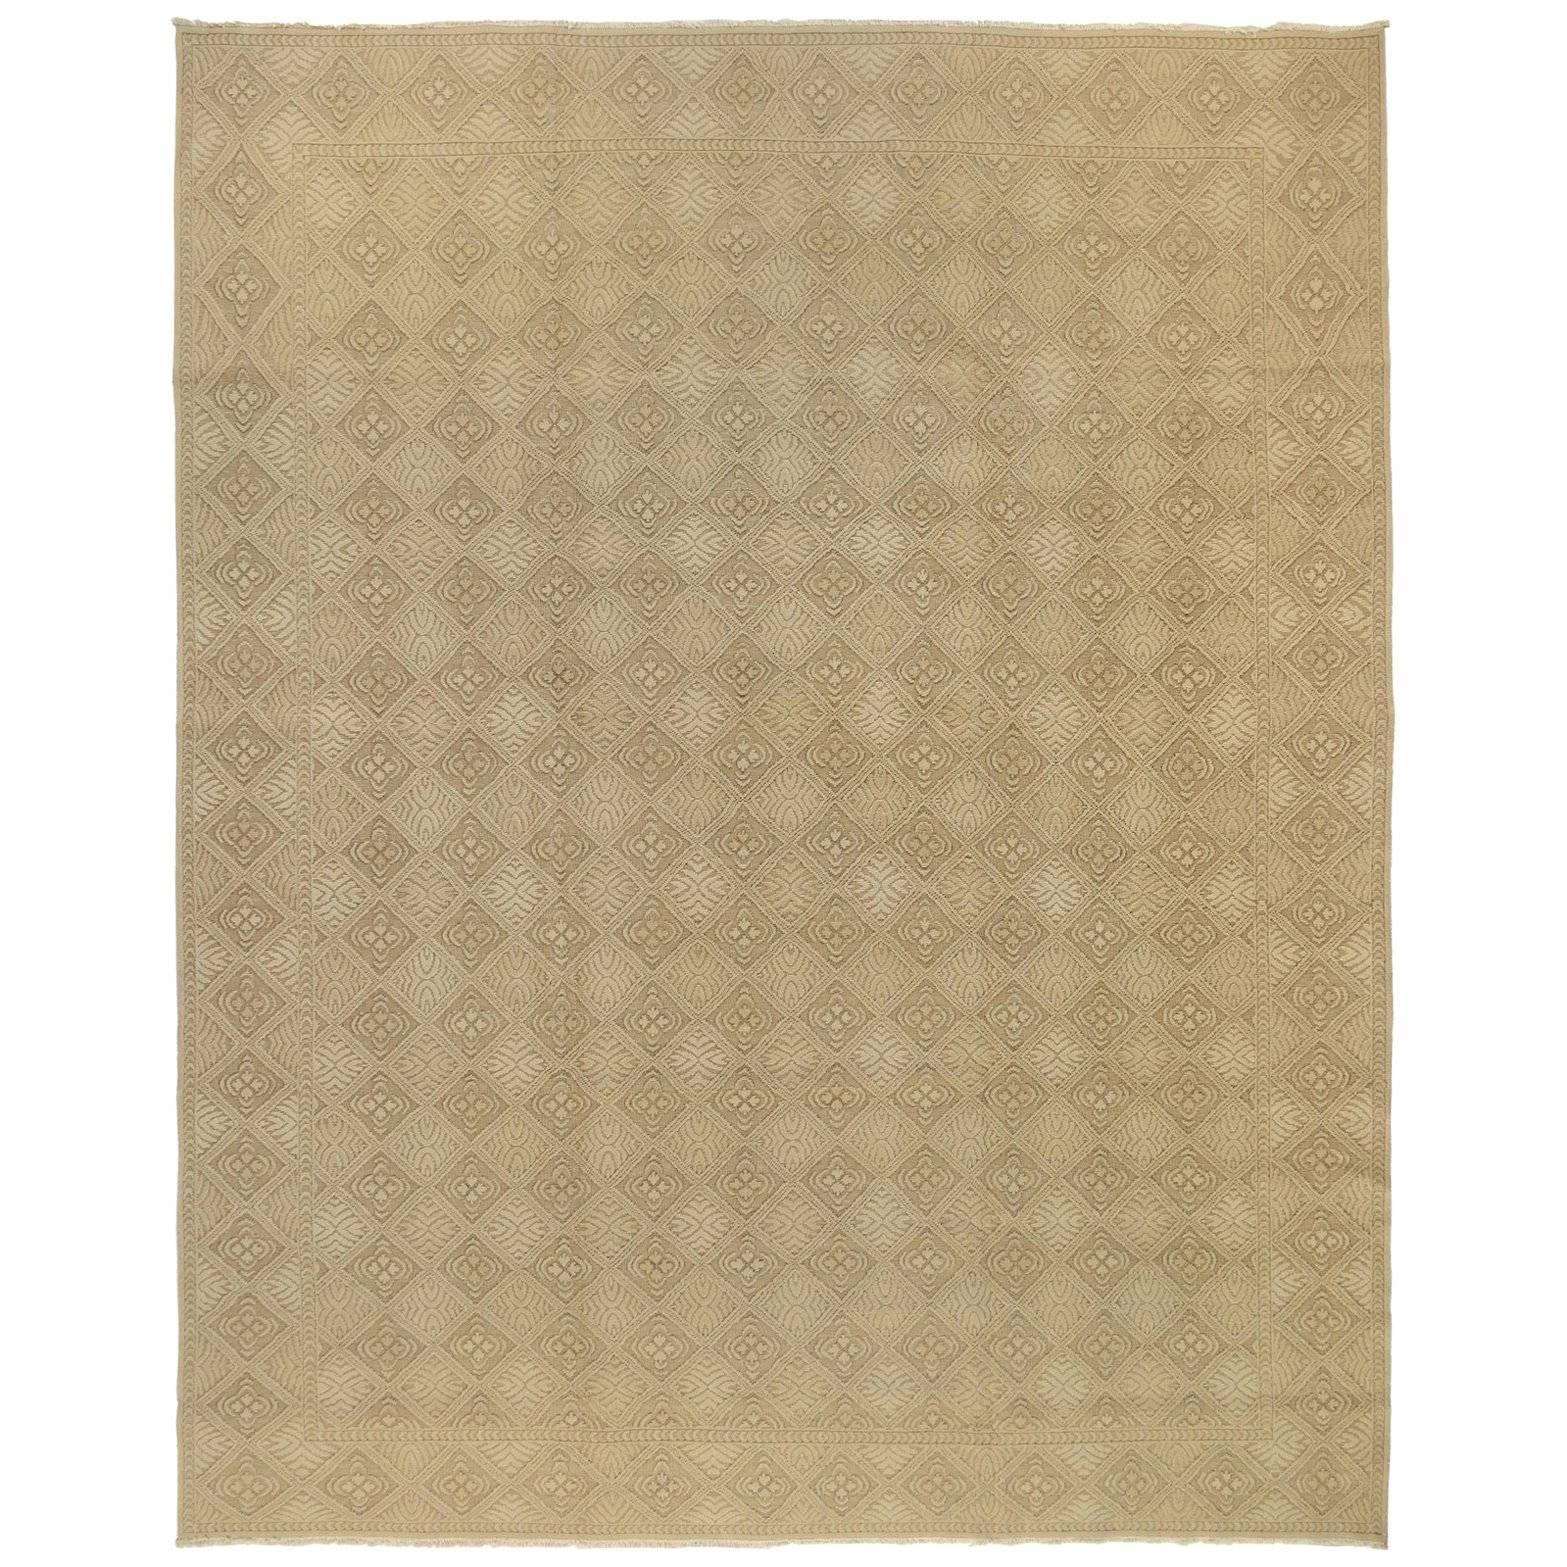 Tone on Tone Geometric Floral Rug For Sale